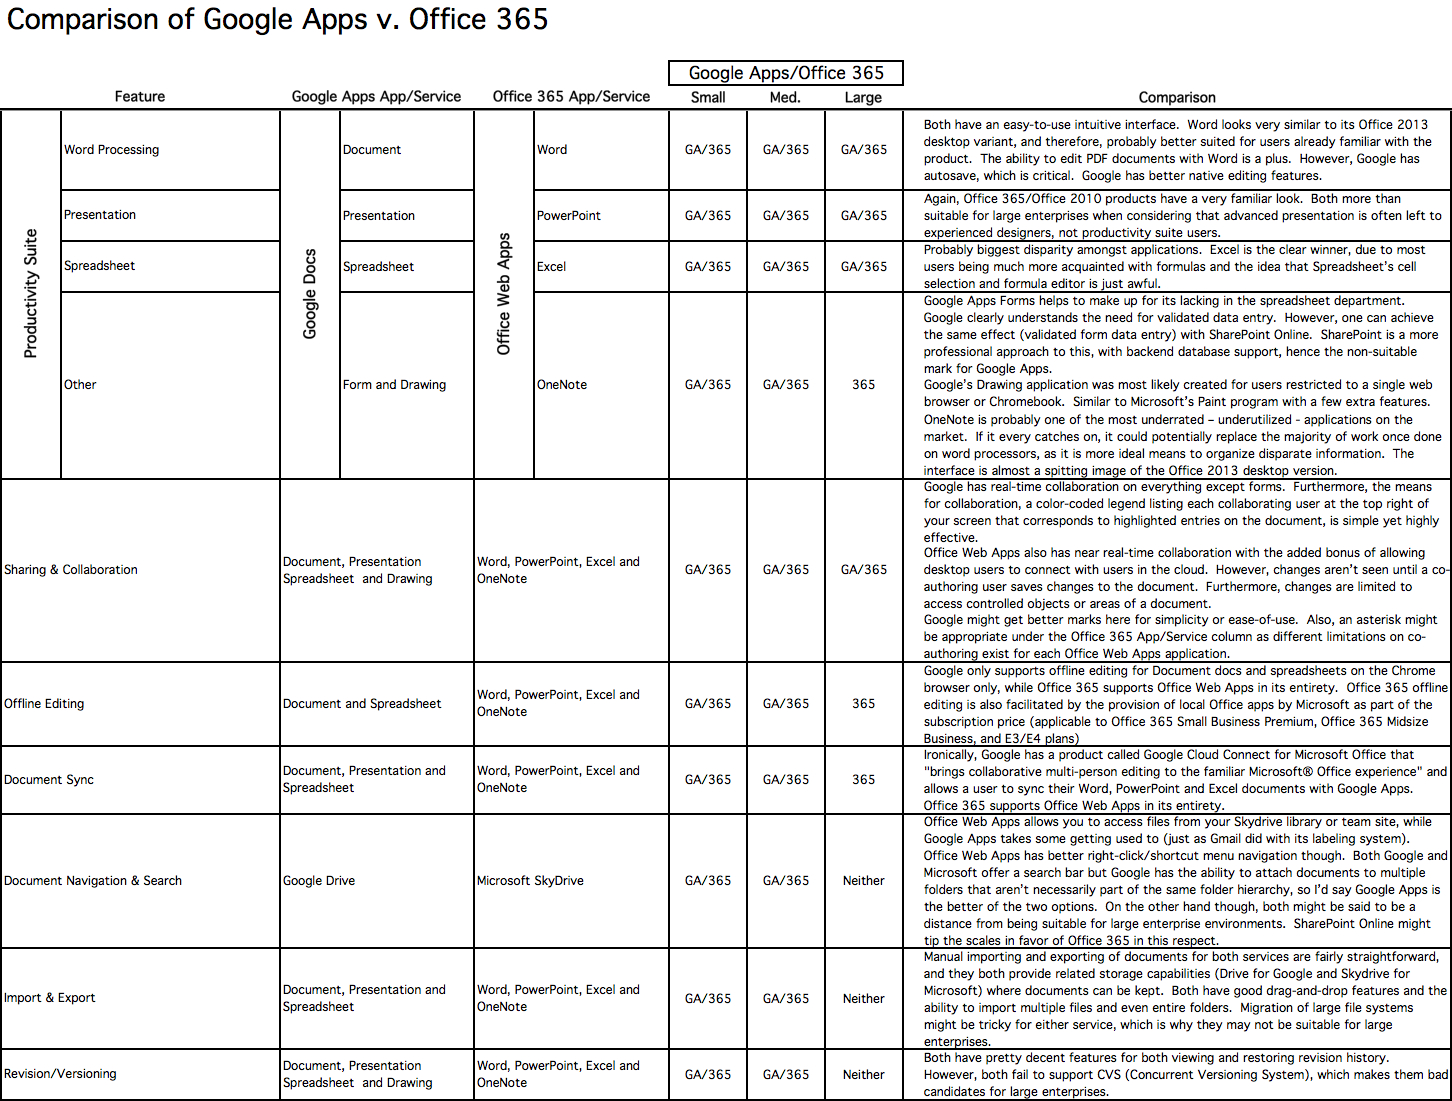 Spreadsheet Compare Office 365 With Google Apps V. Office 365: Headtohead Comparison Of Features